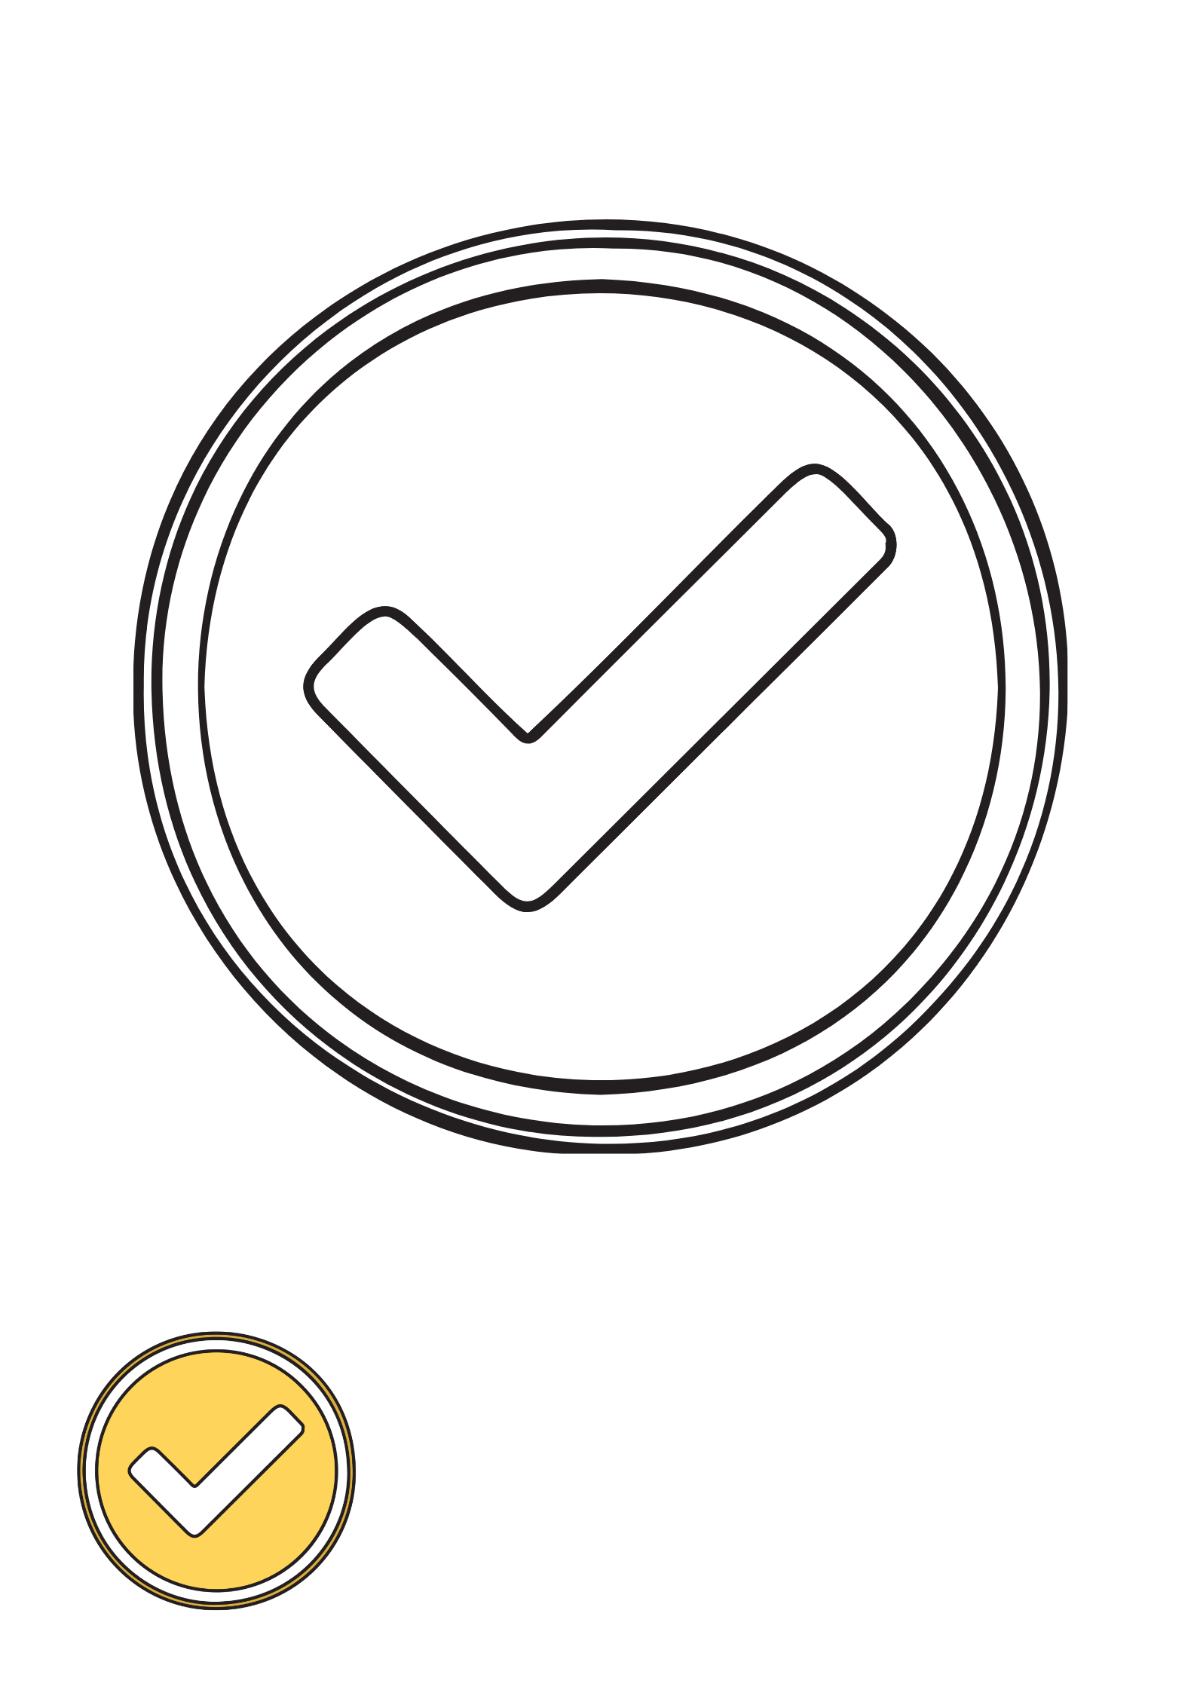 Yellow Check Mark coloring page Template